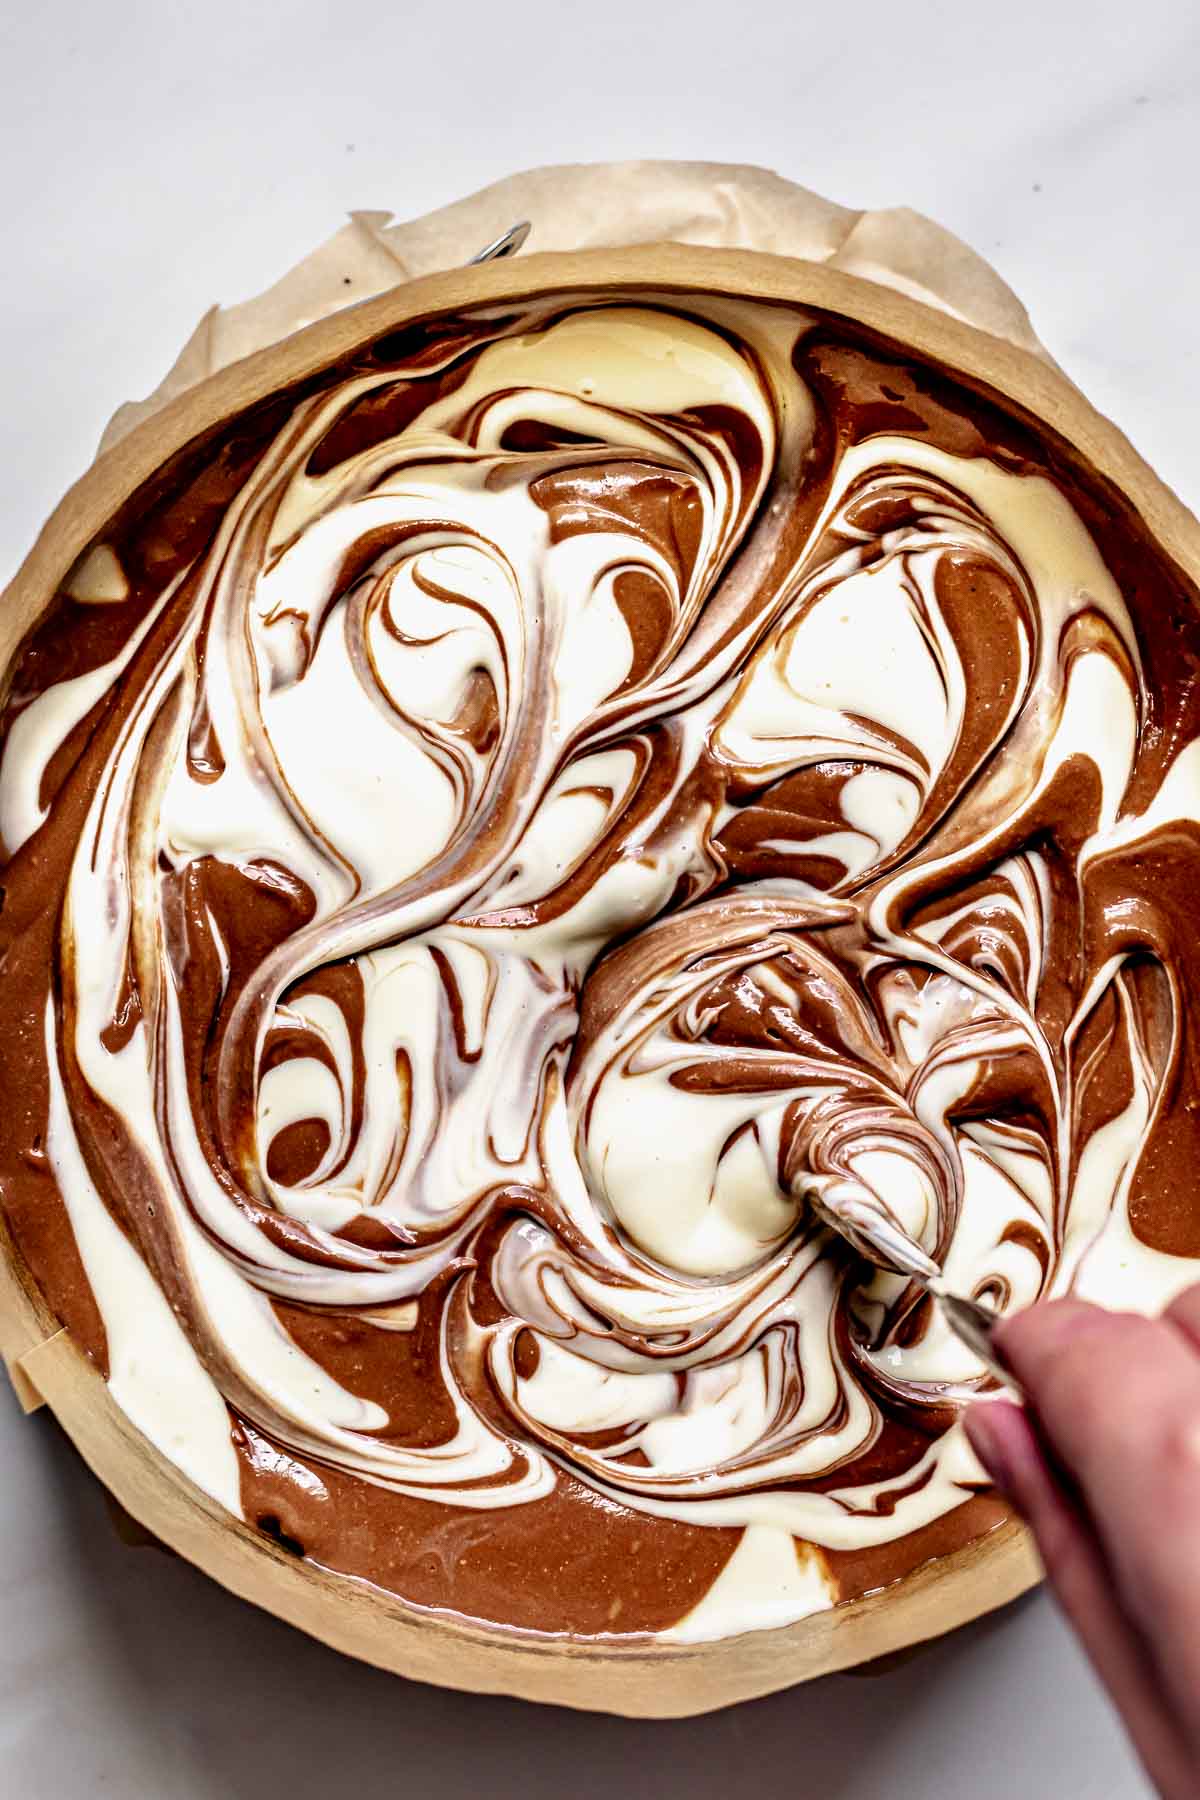 A knife creates a swirl pattern into the  cheesecake batter.